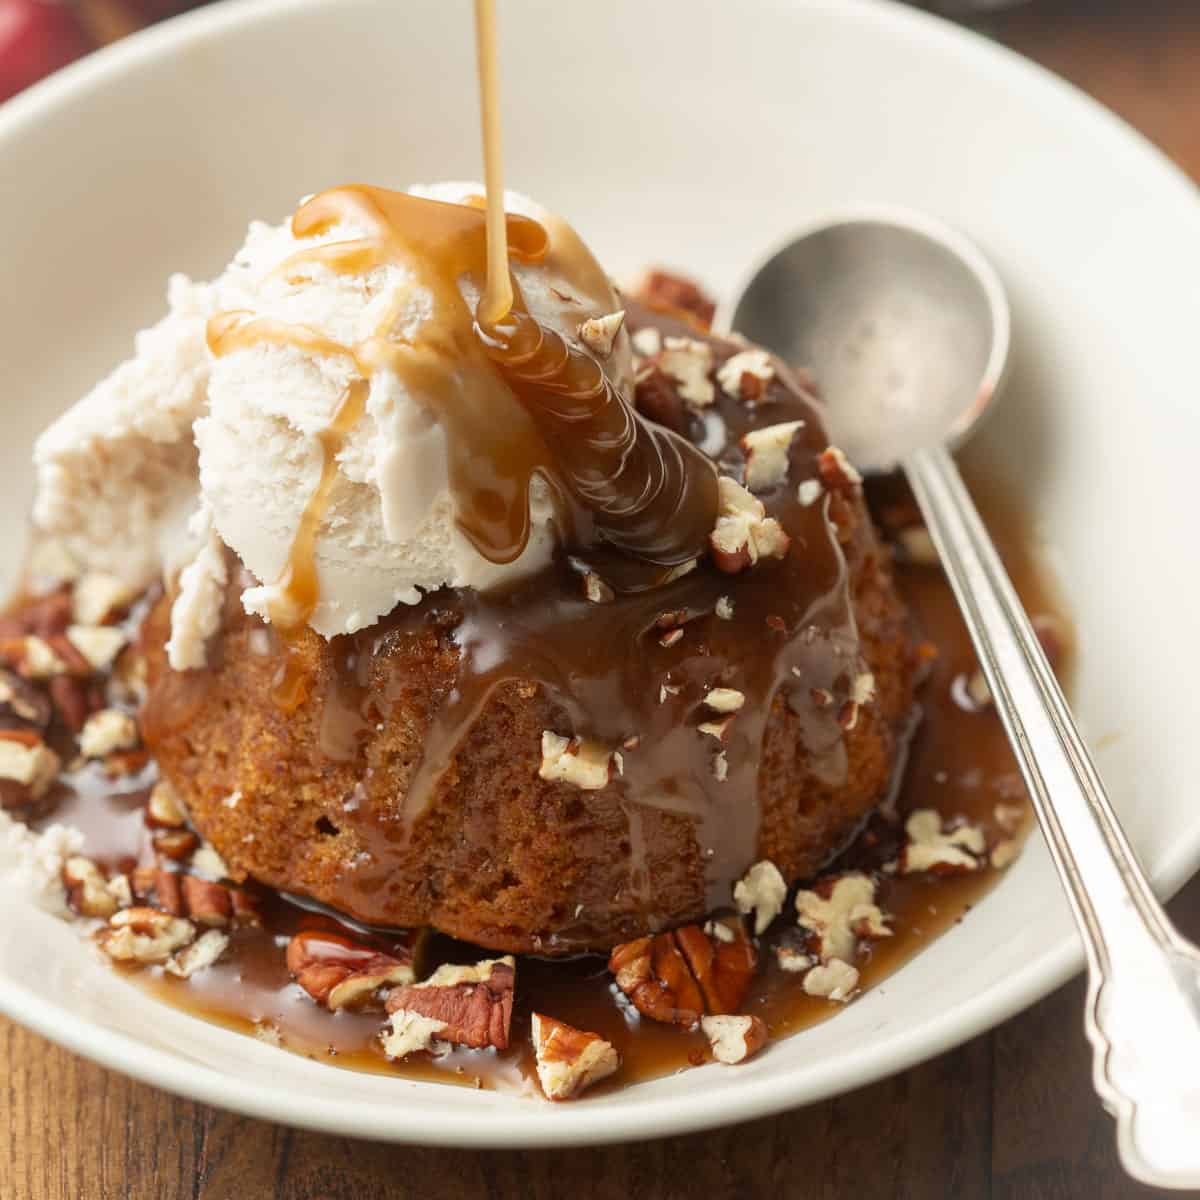 Vegan Sticky Toffee Pudding in a bowl with ice cream and nuts, toffee sauce being drizzled on top.